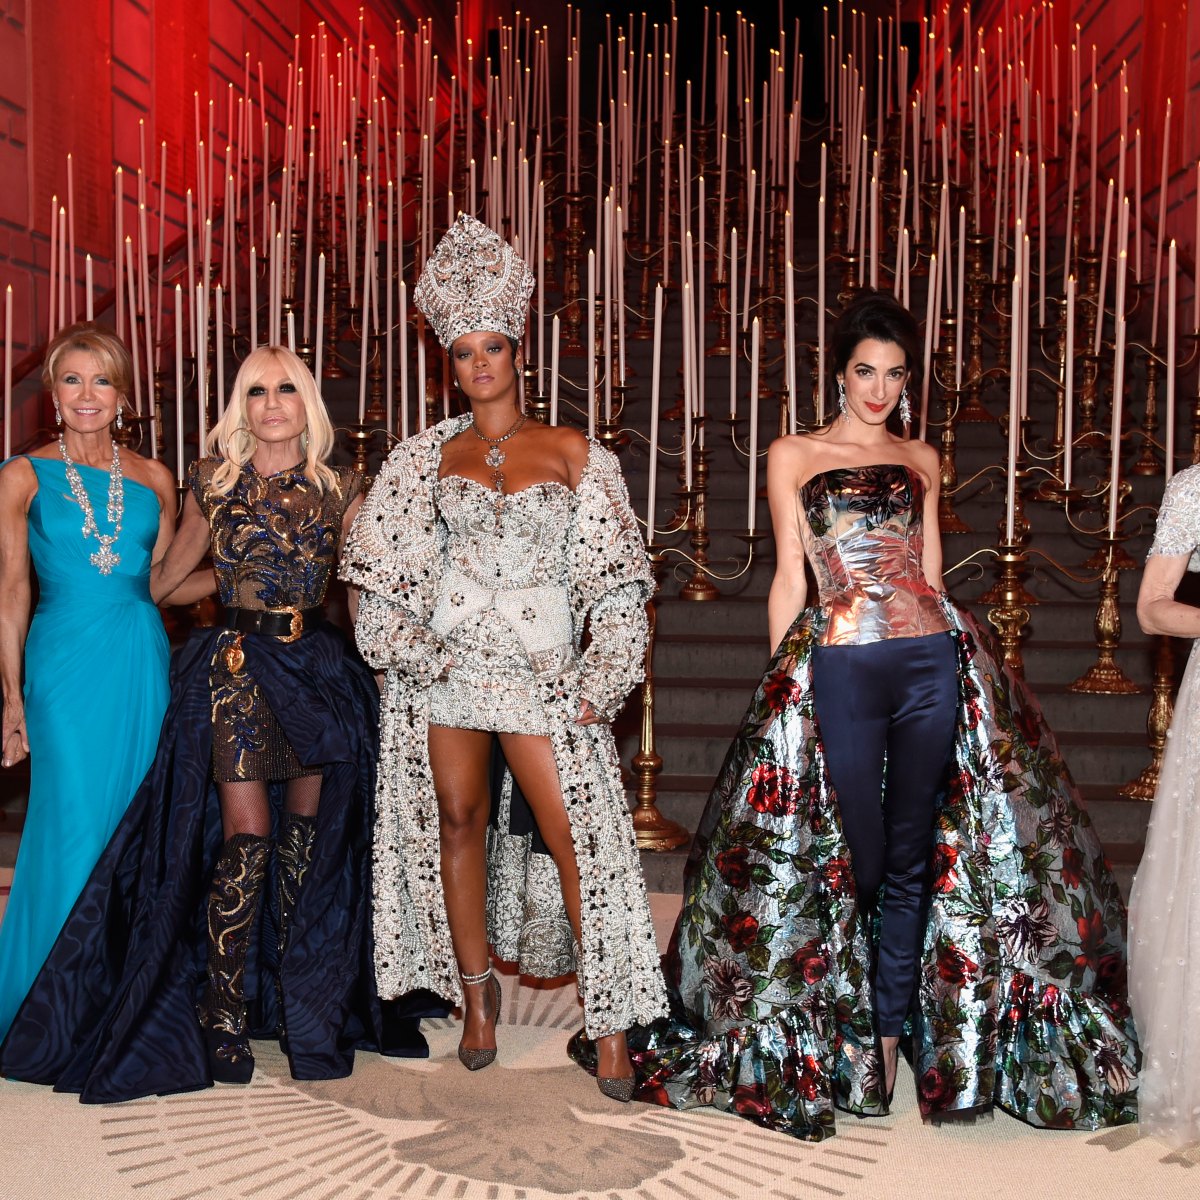 Met Gala Viewing Party Tips: How to Throw a Fun Bash